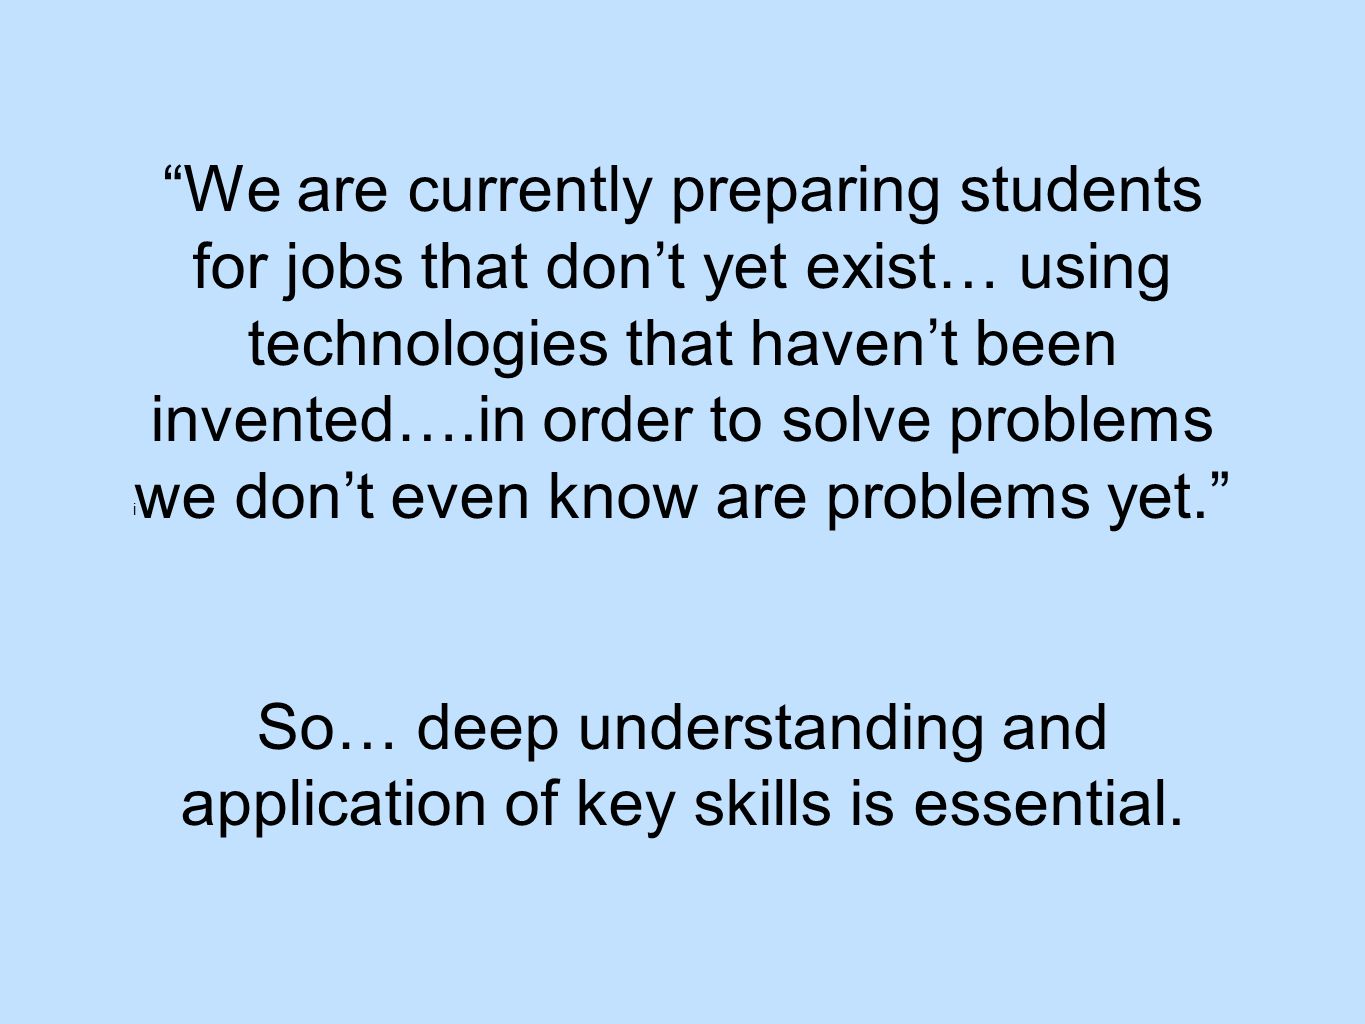 i We are currently preparing students for jobs that don’t yet exist… using technologies that haven’t been invented….in order to solve problems we don’t even know are problems yet. So… deep understanding and application of key skills is essential.